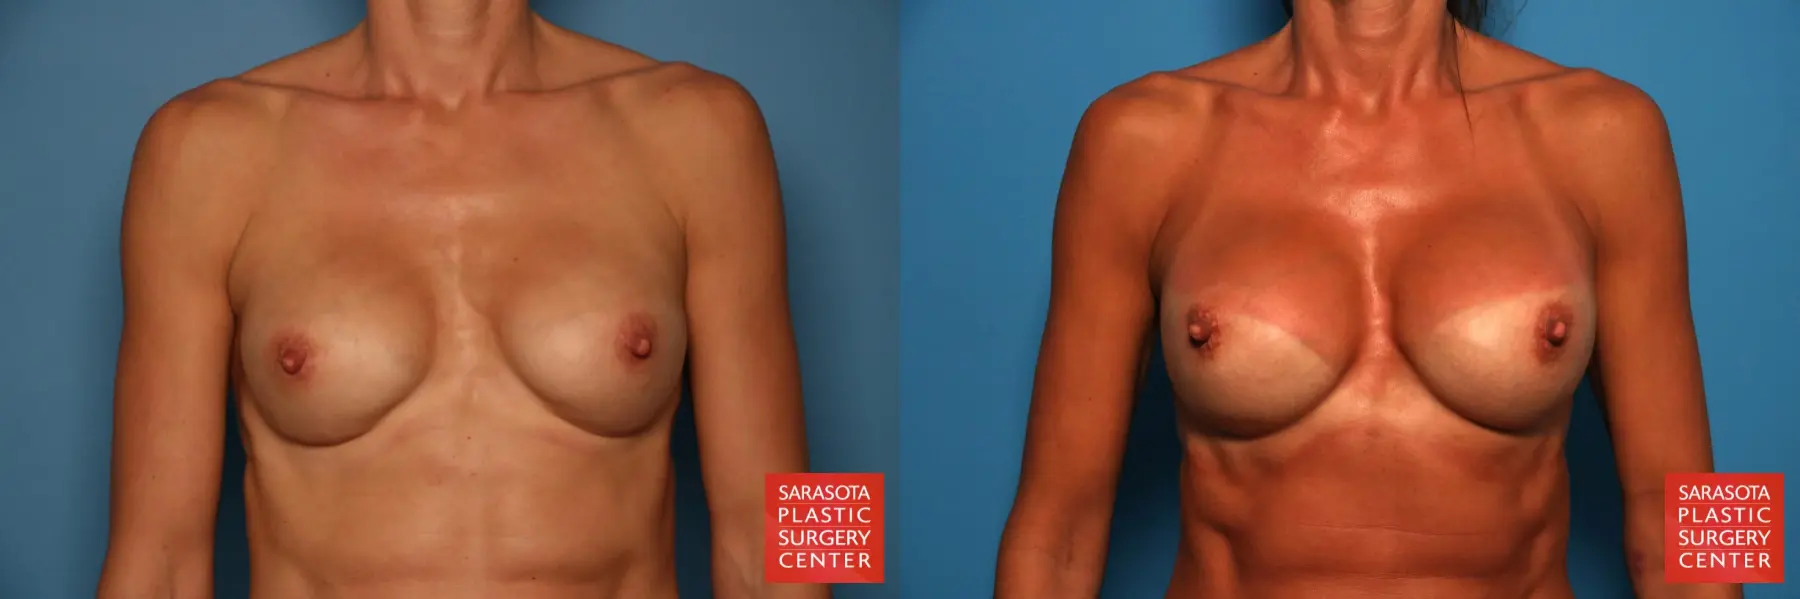 Breast Revision: Patient 2 - Before and After 1